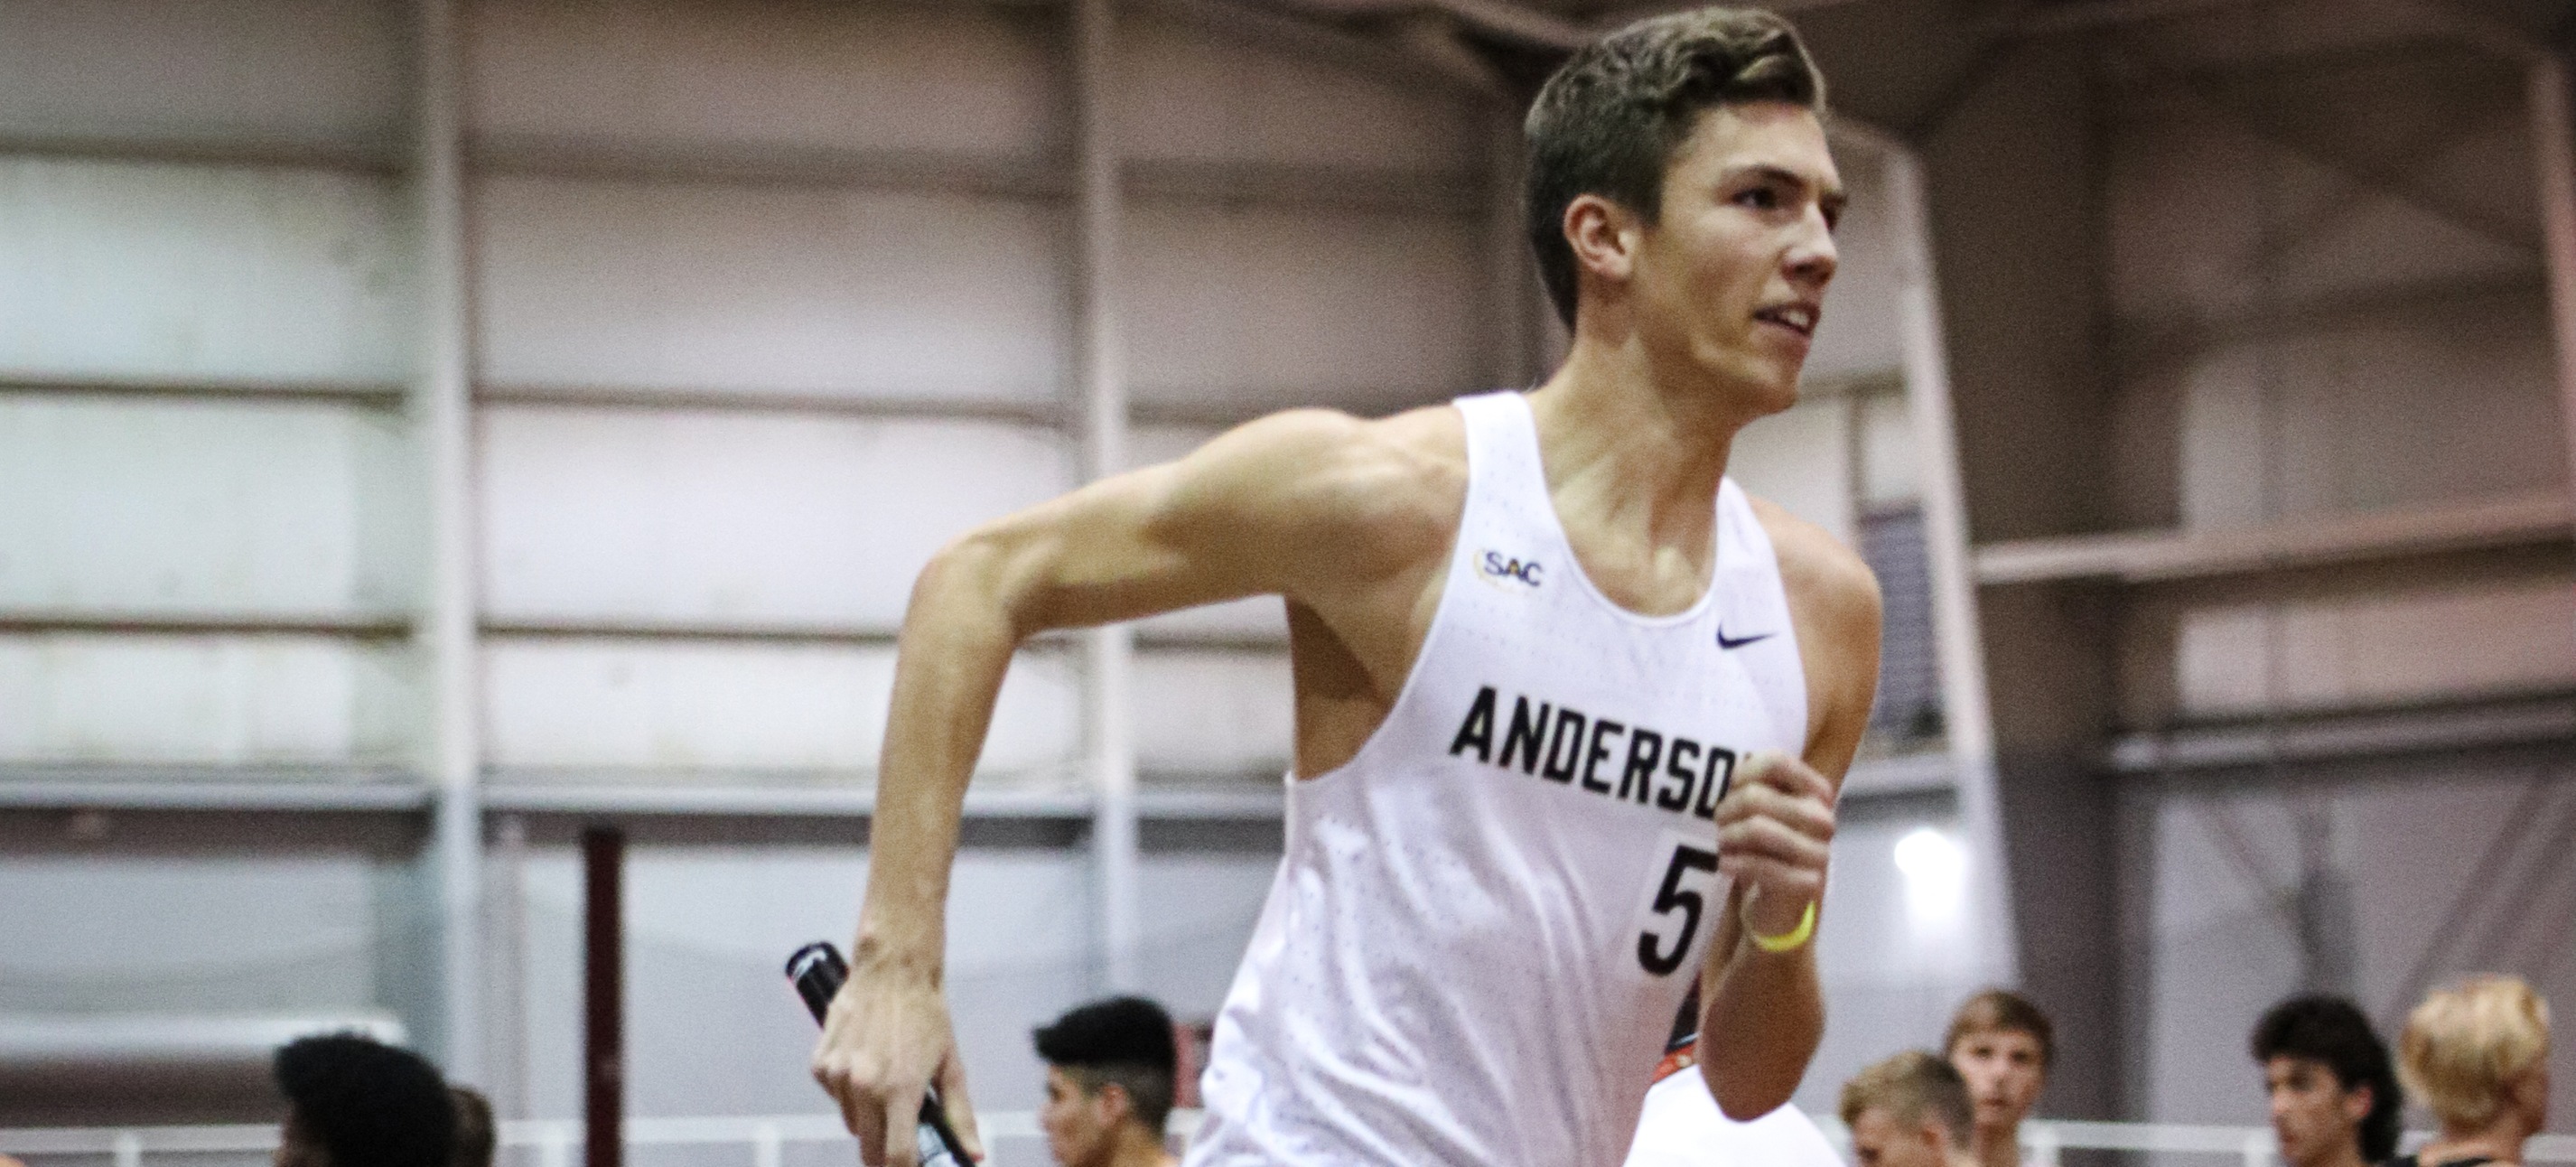 Men's Track and Field Records Three Top-10 Finishes at USC Indoor Open